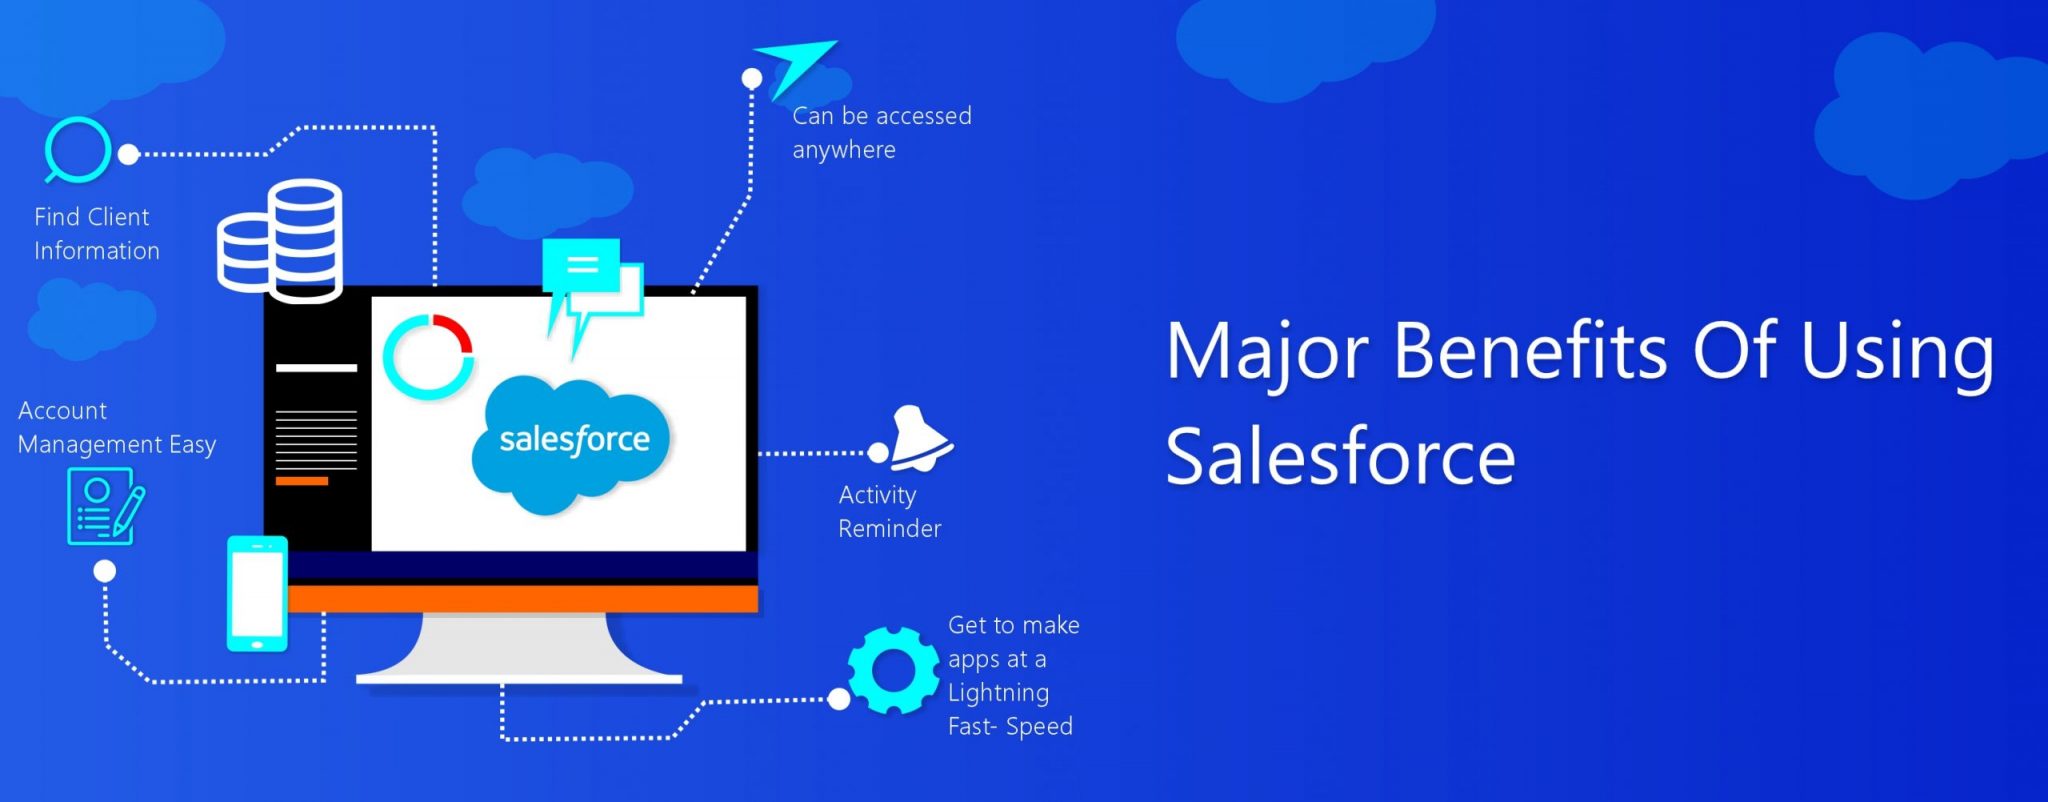 Major-Benefits-of-using-salesforce-scaled-1-2048x802